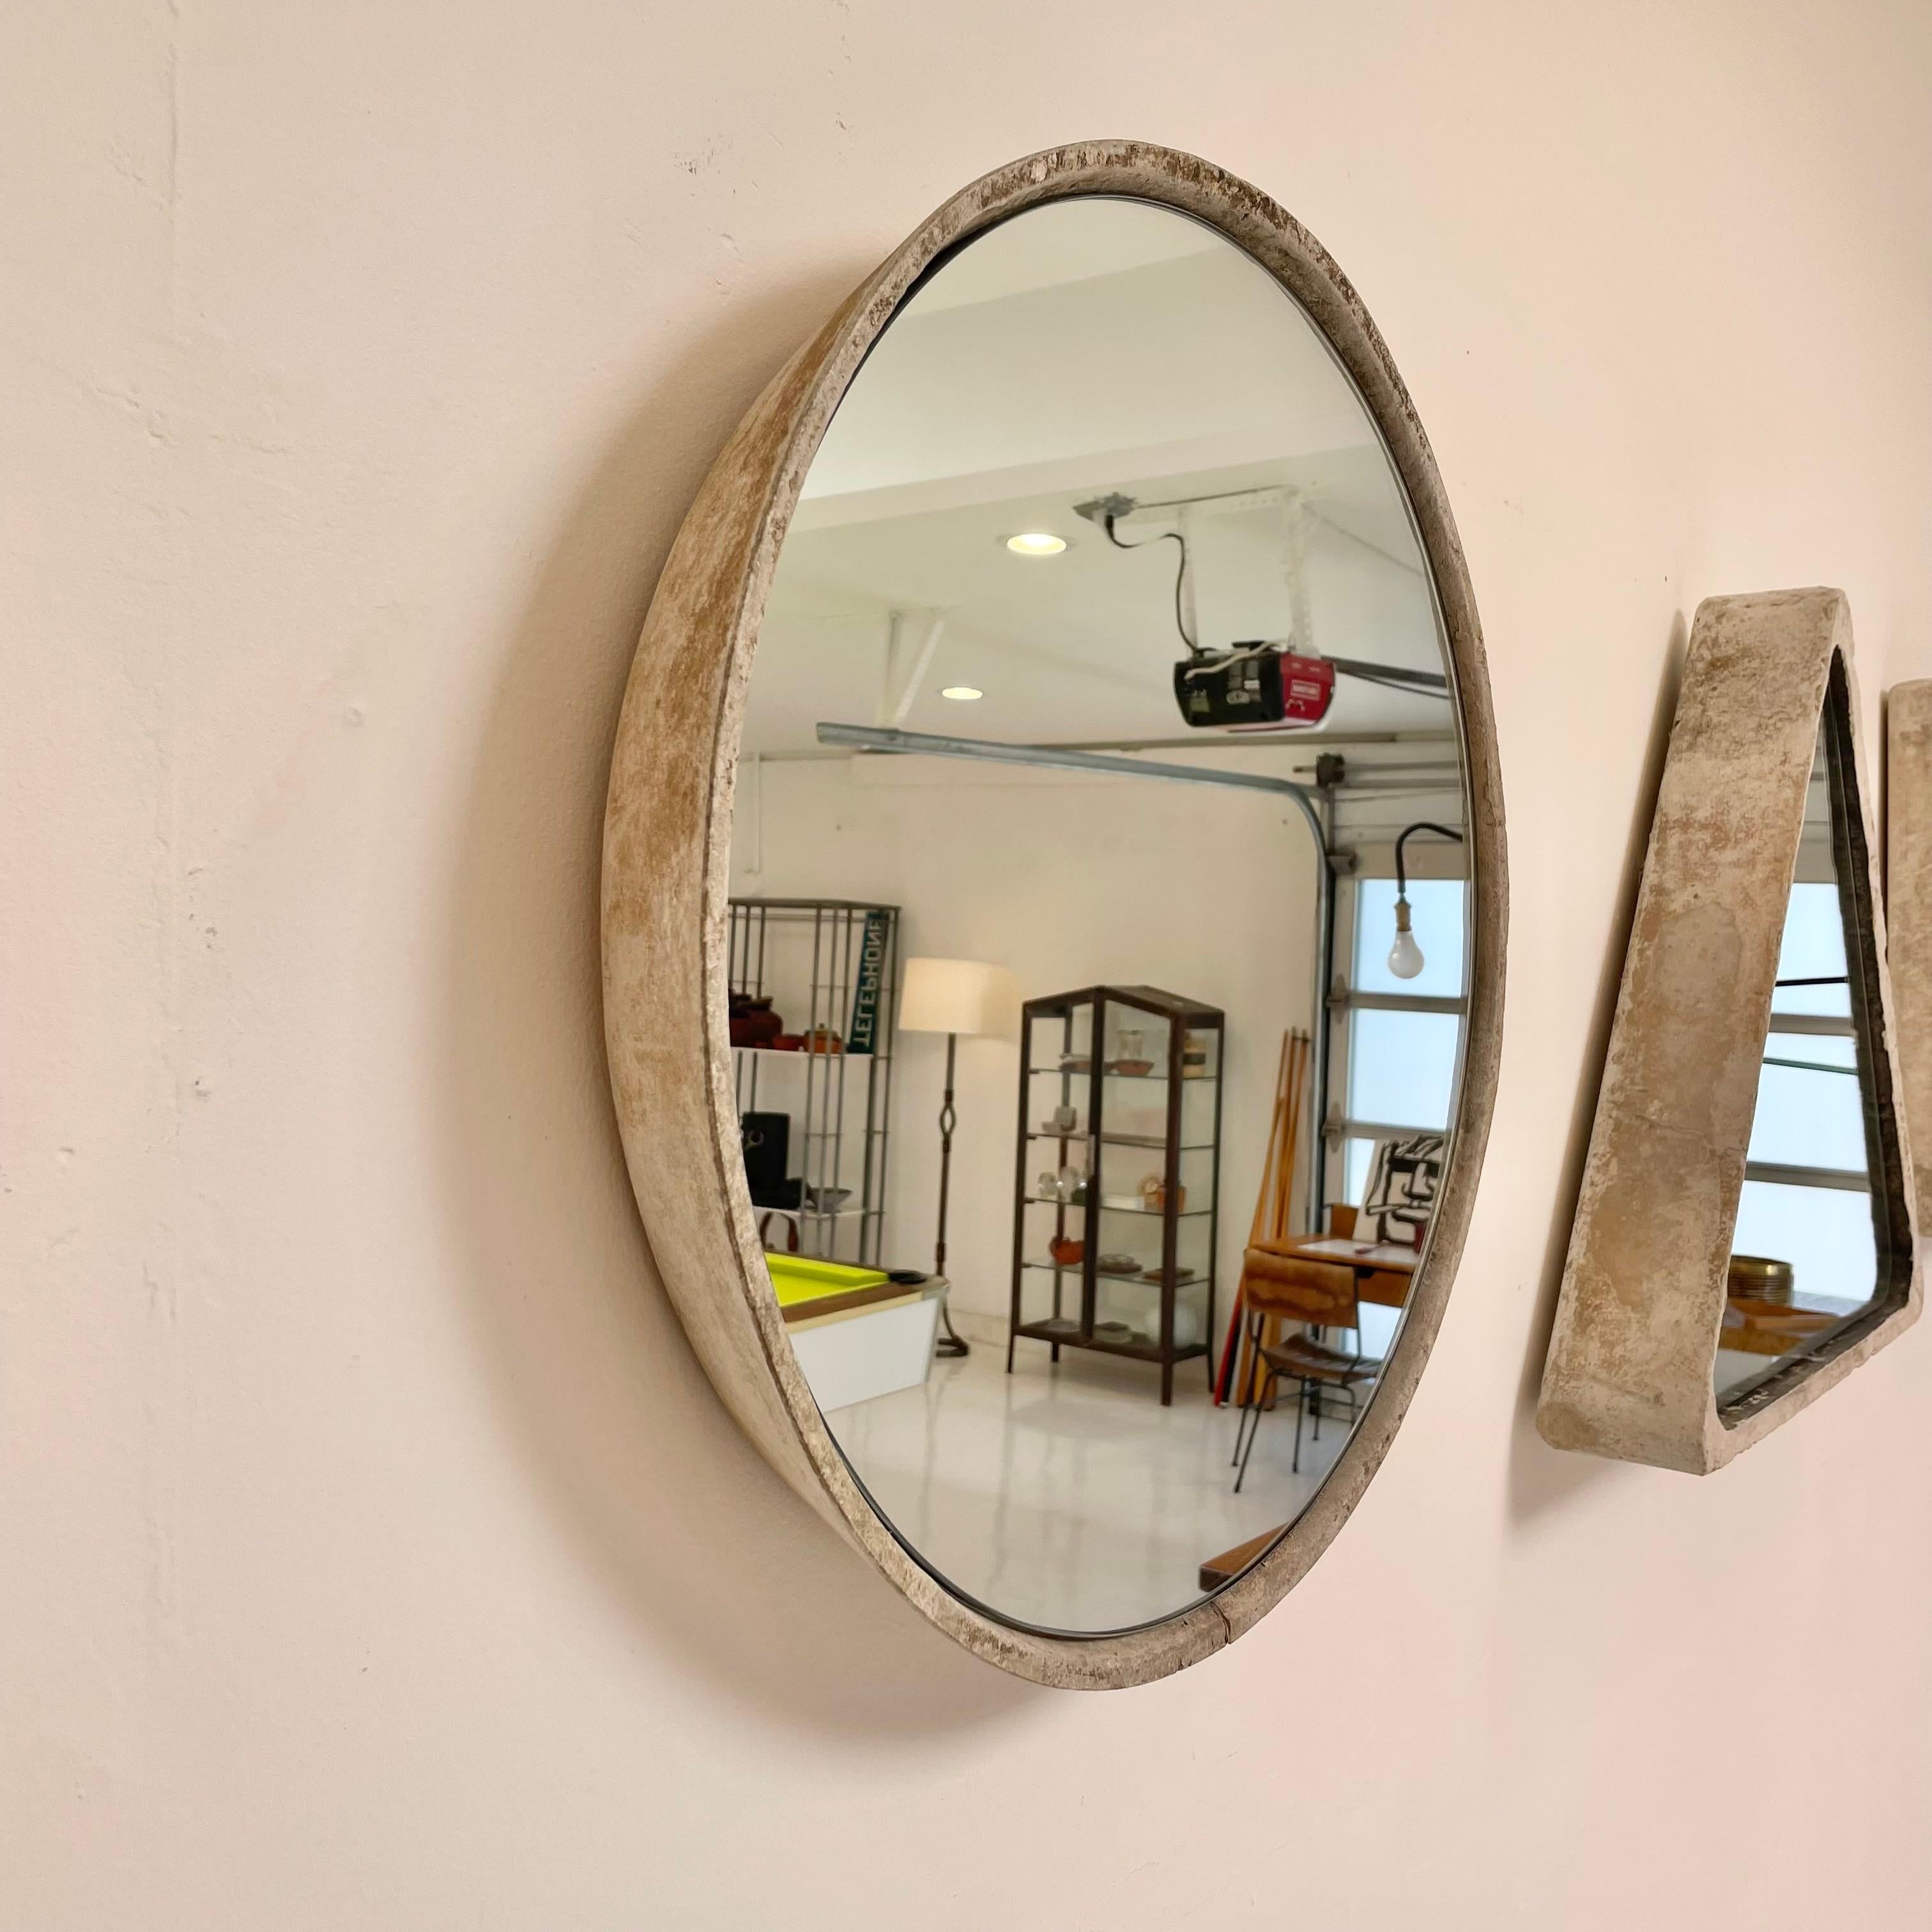 Very cool and unique circular Willy Guhl concrete mirror. Concrete vessel originally produced at the Eternit factory in Switzerland in the 1960’s and mirror was professionally hand cut and added recently. Beautiful patina as expected with age